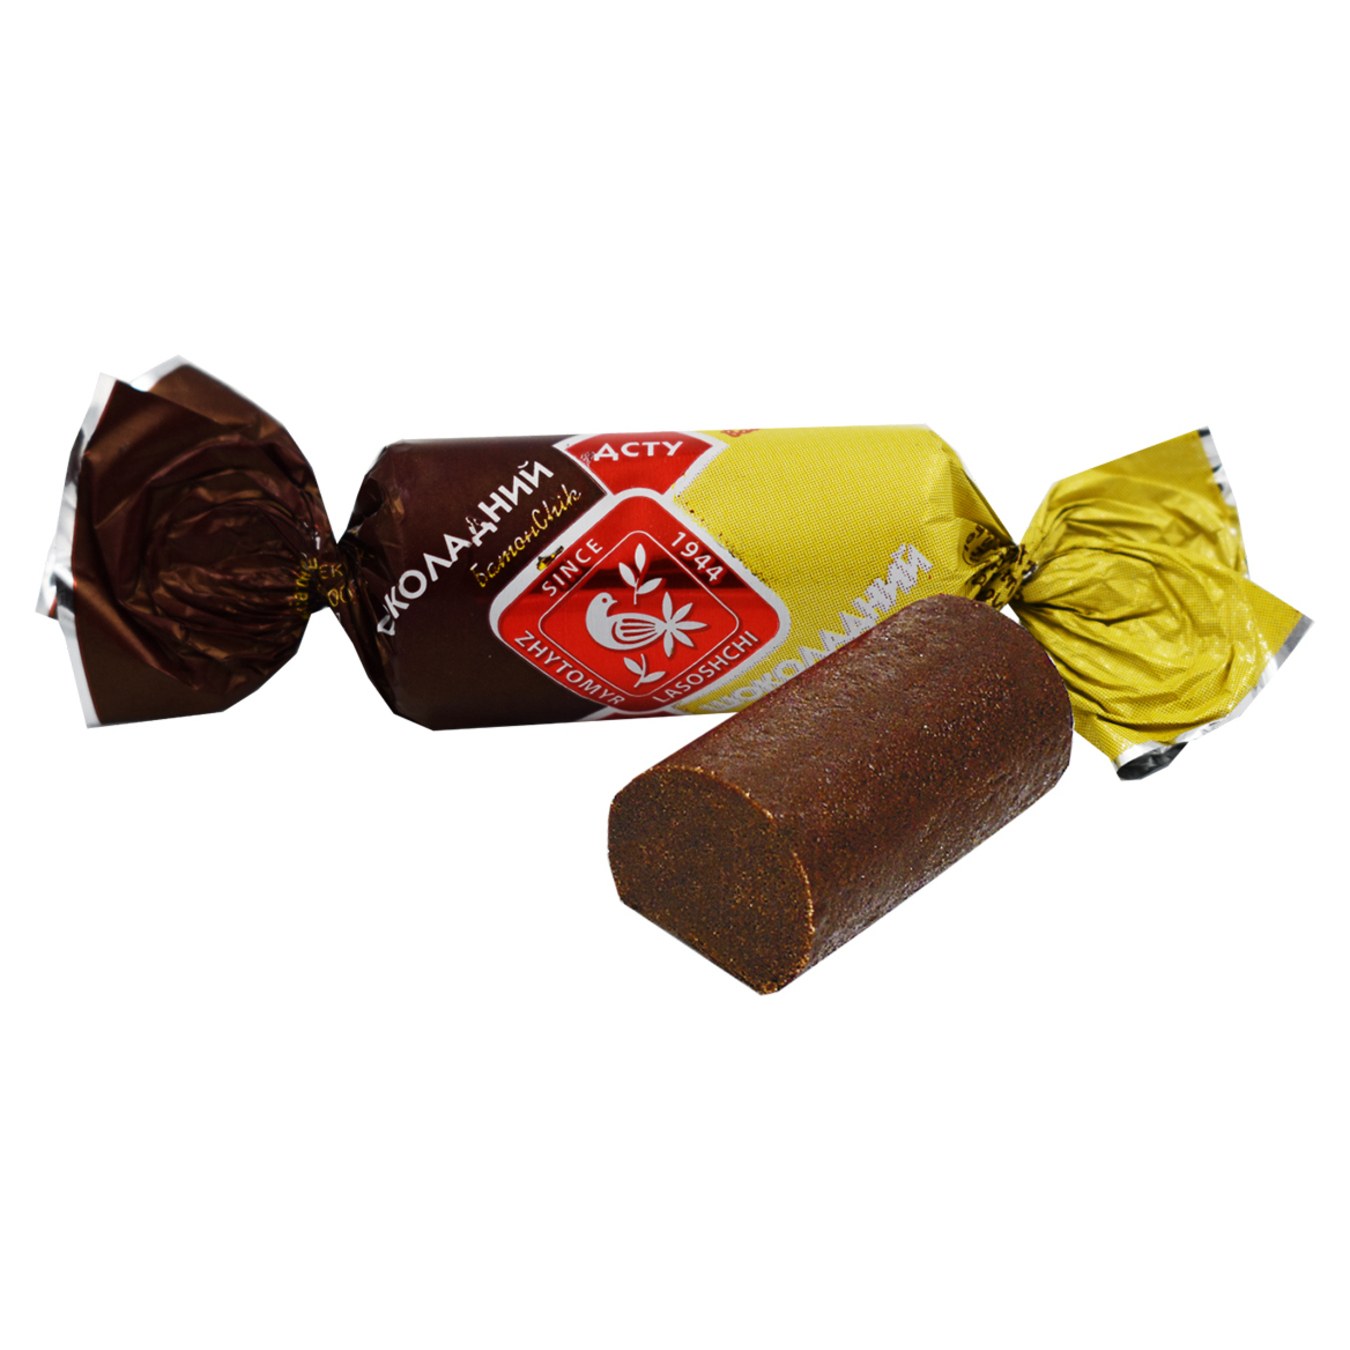 Zhytomyr sweets Sweets Chocolate bar wt